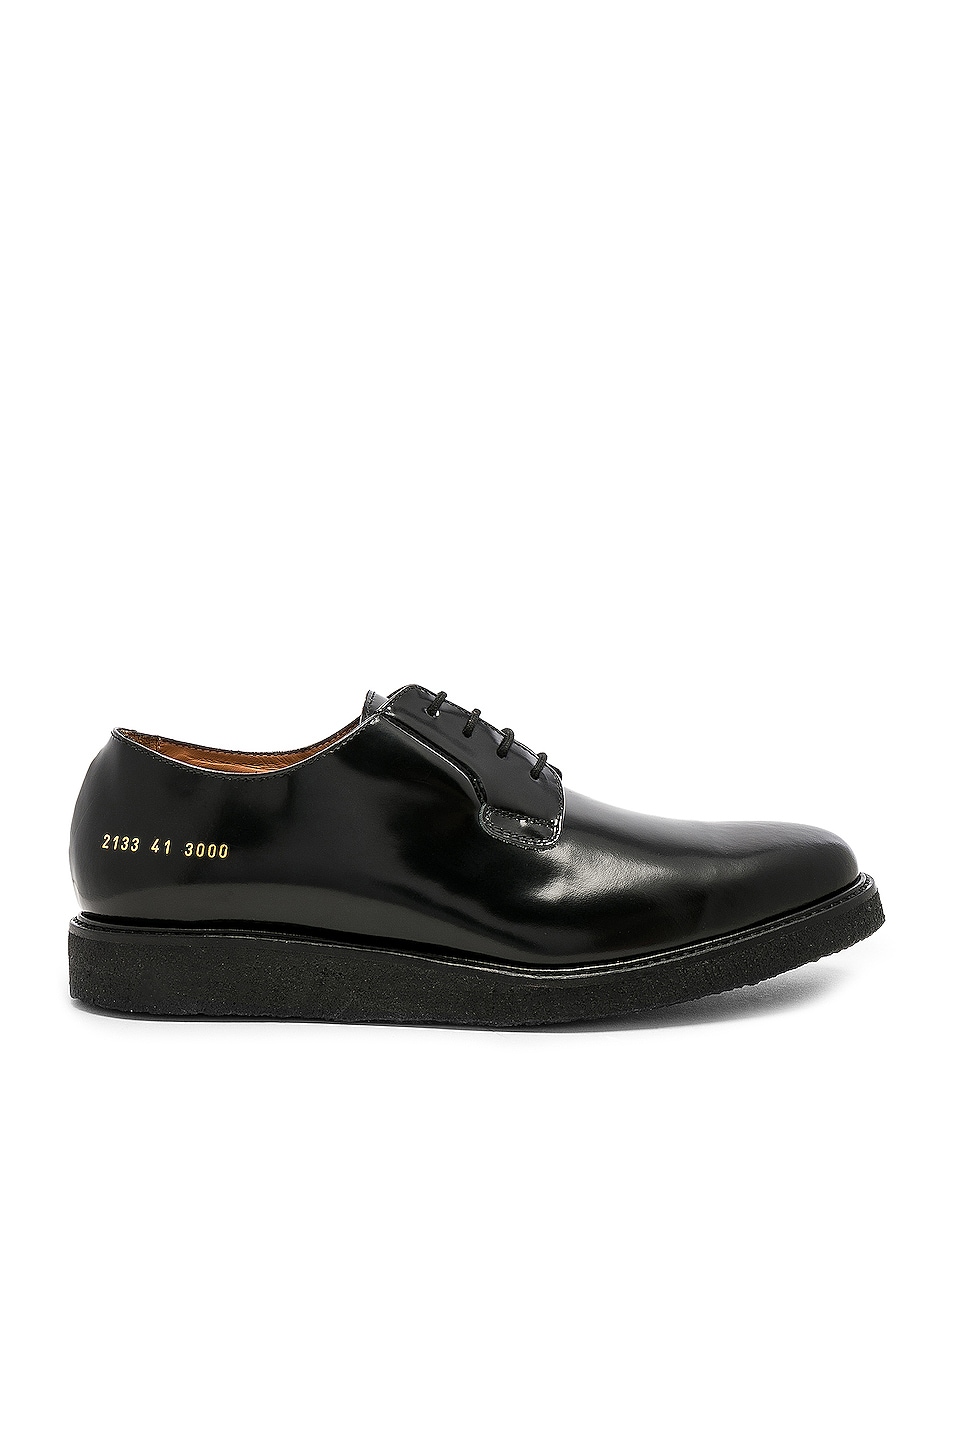 Common Projects Derby Shine in Black & Black | FWRD